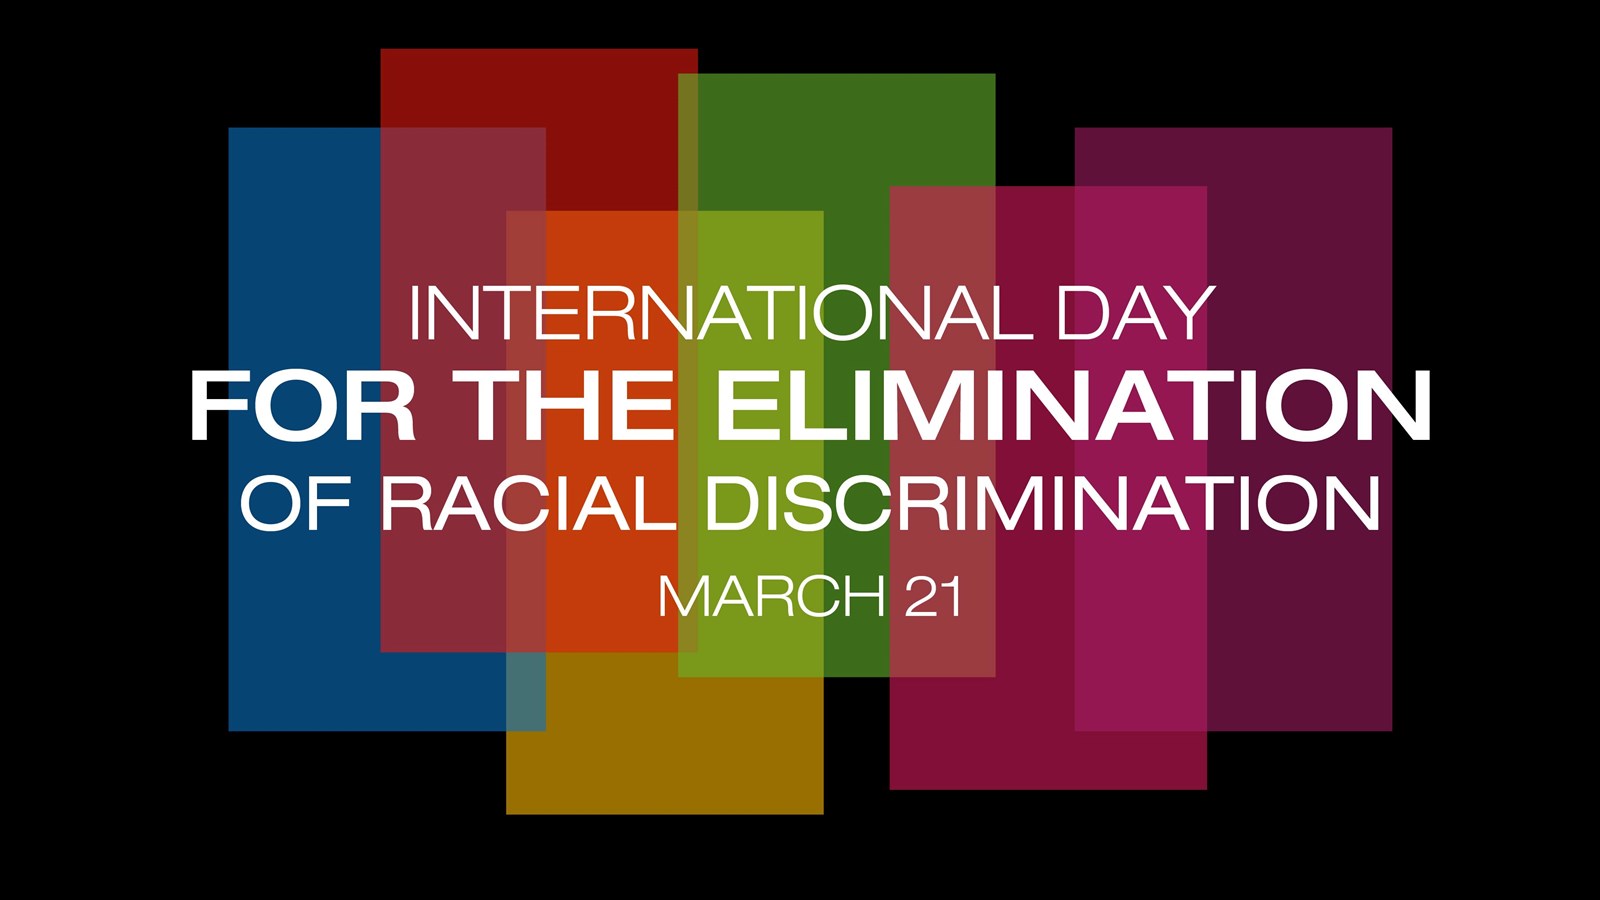 International Day for the Elimination of Racial Discrimination March 21